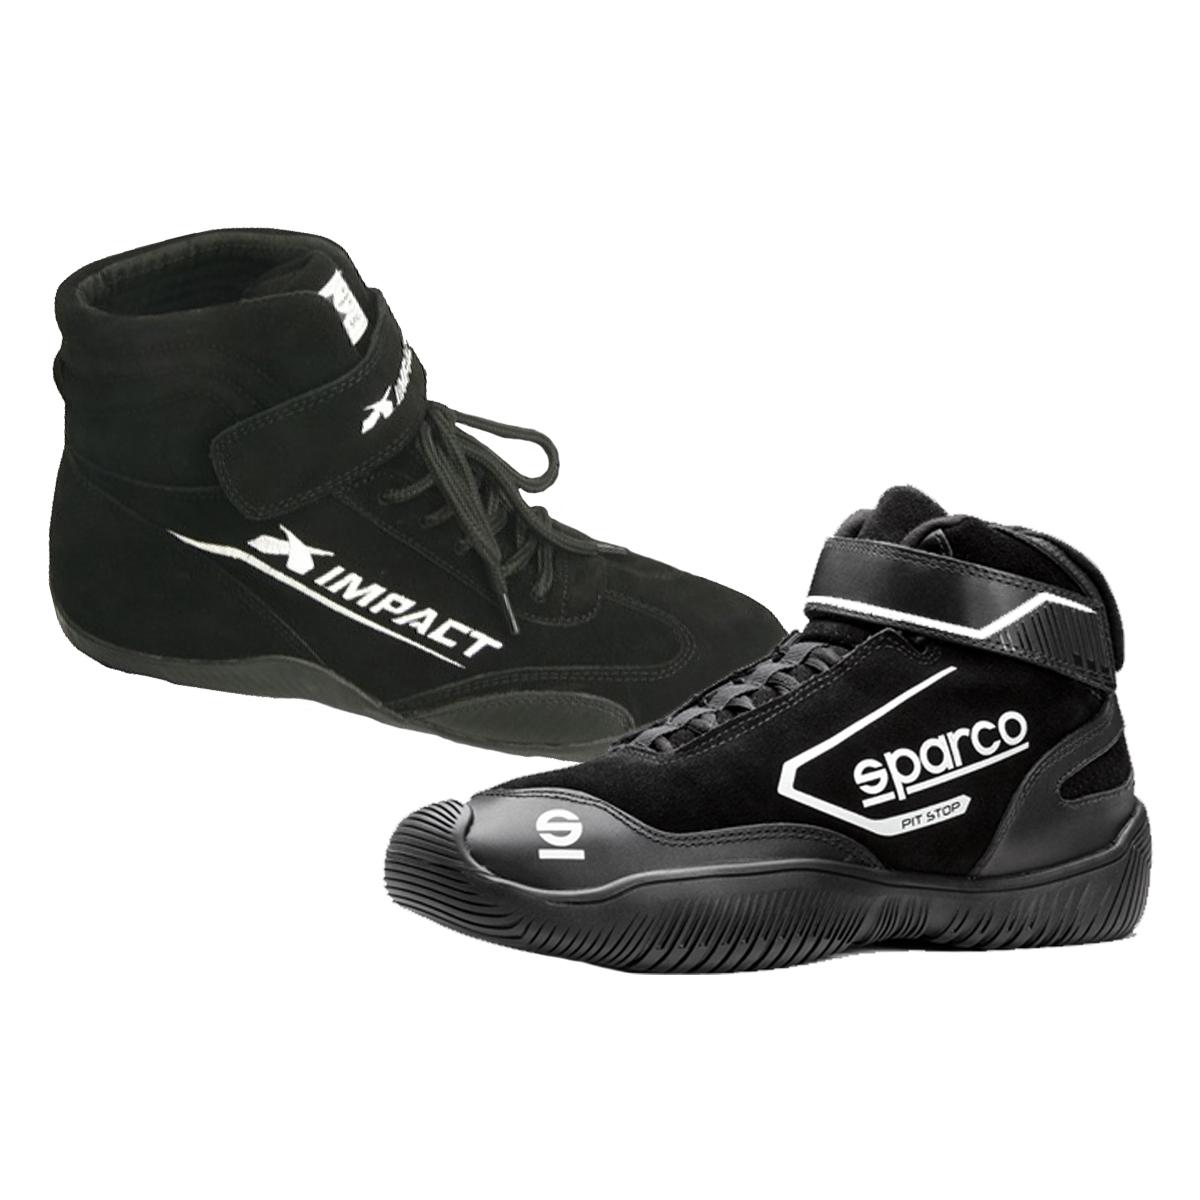 Racing Shoes & Boots